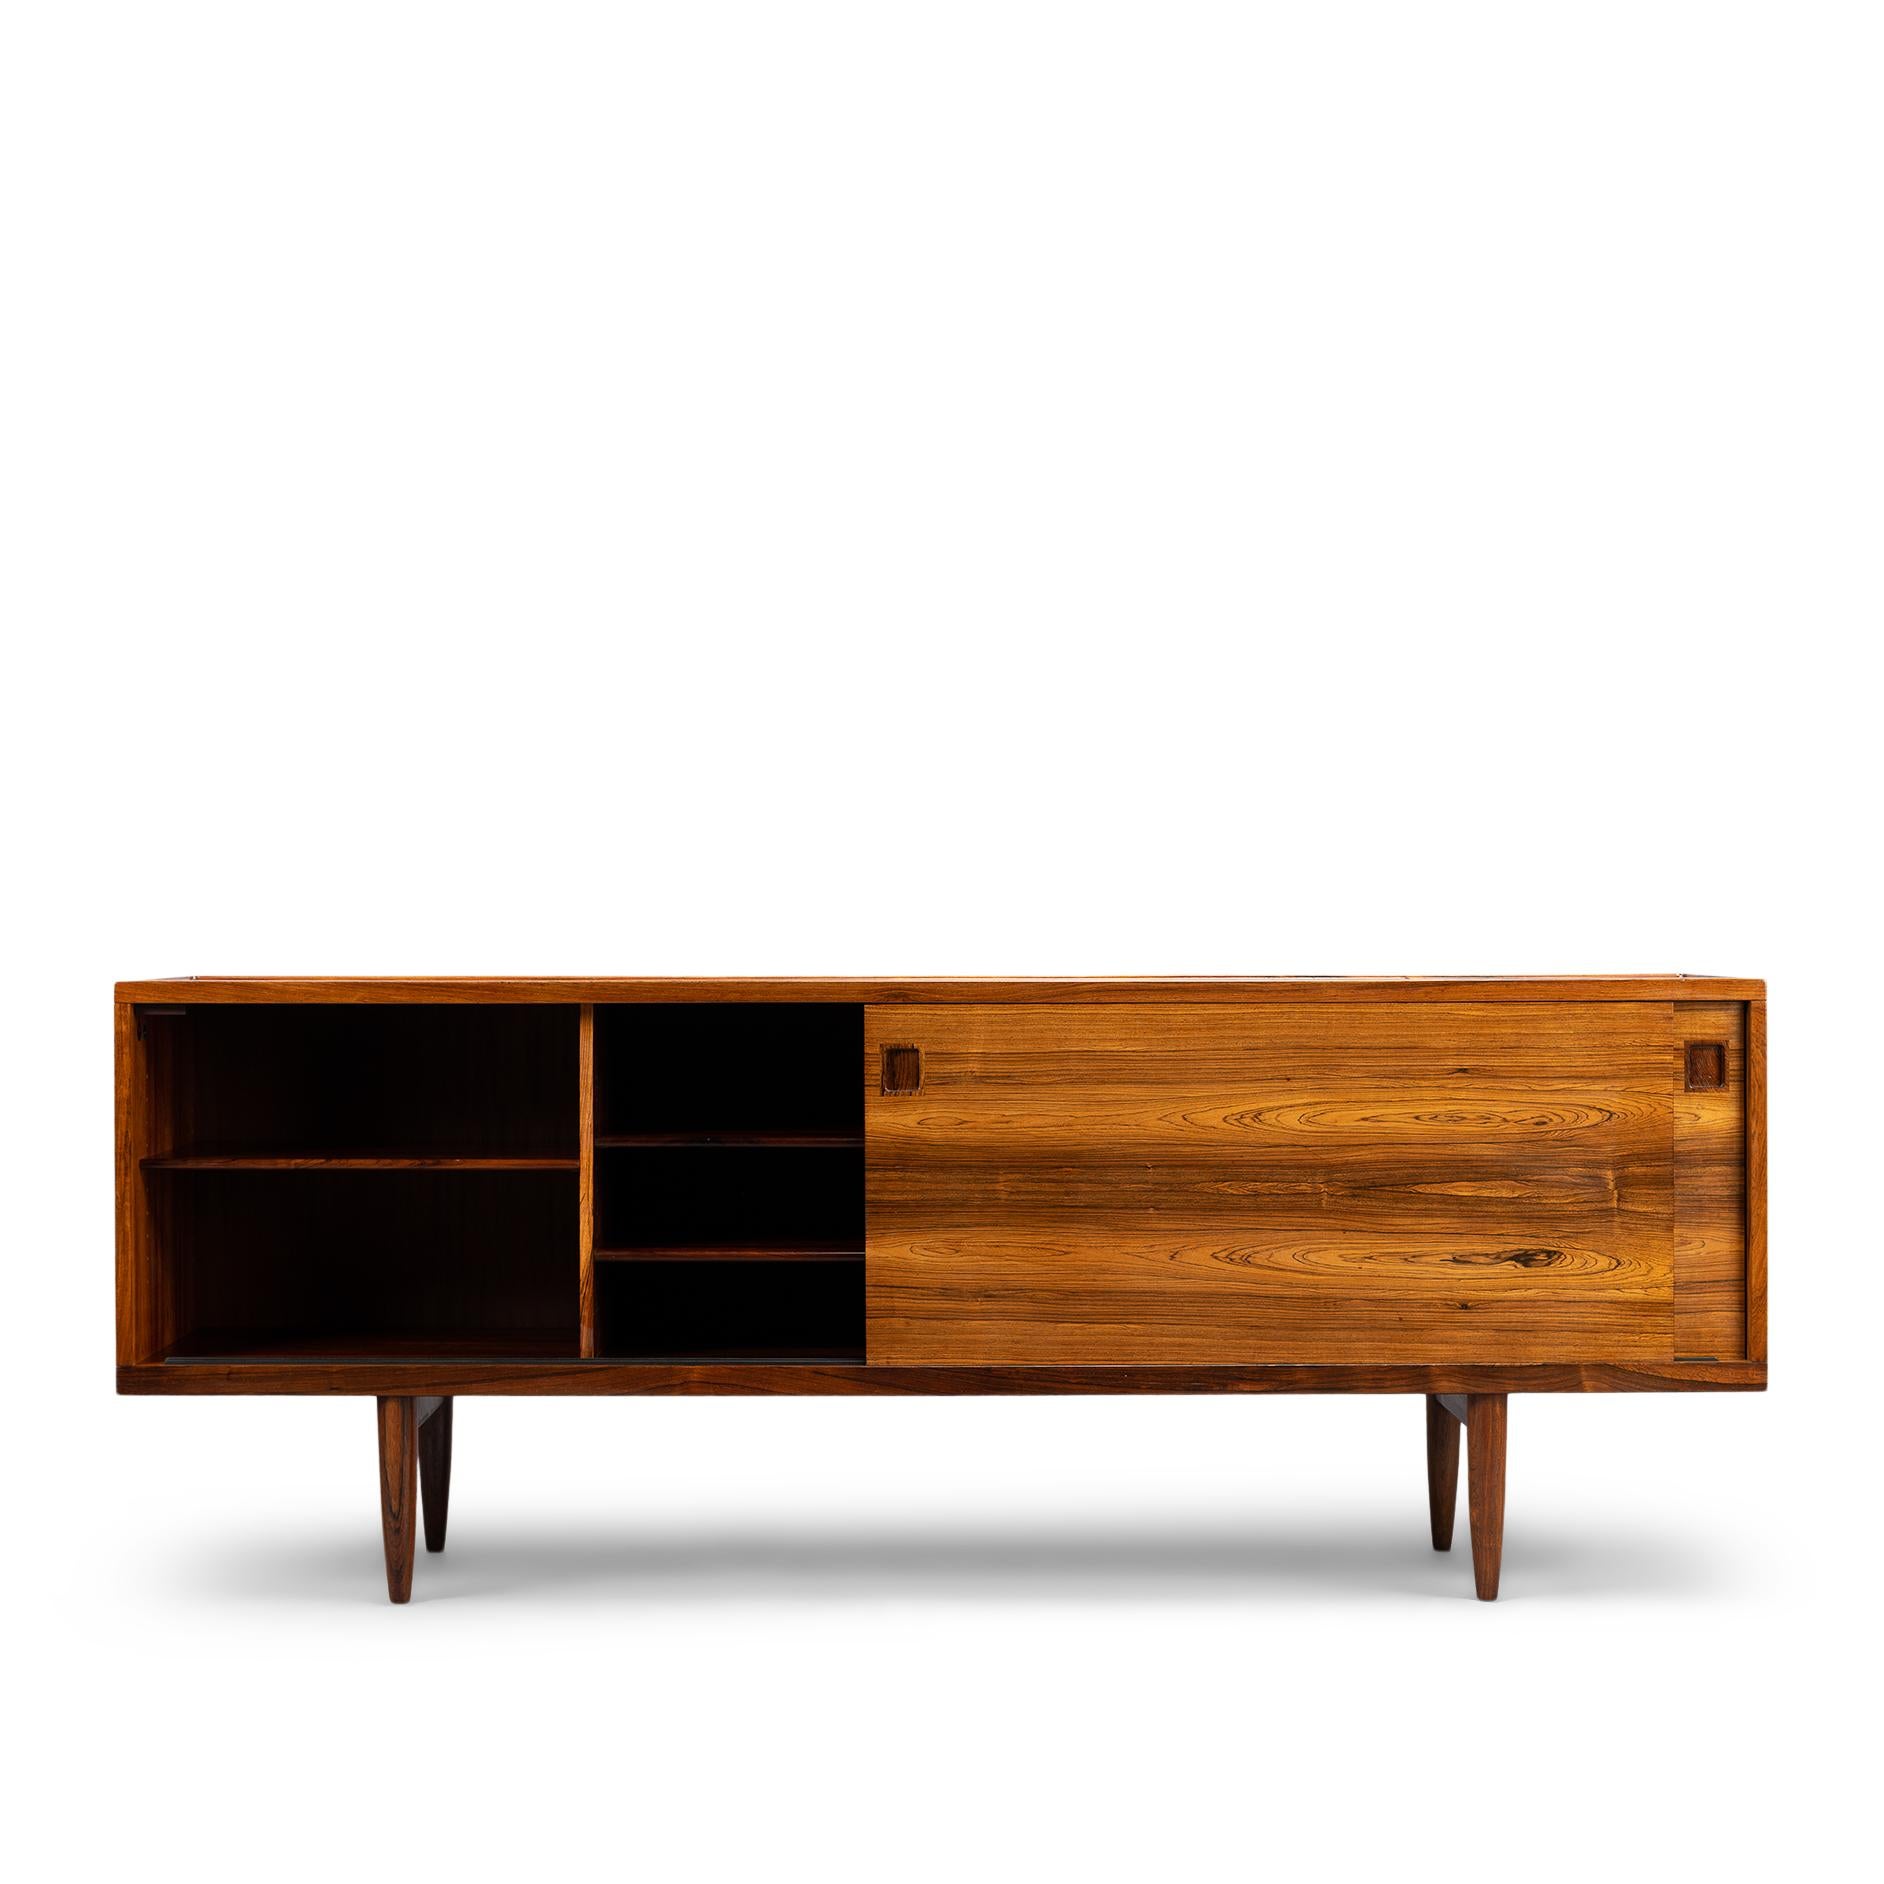 Mouthwatering rosewood model no. 20 beauty midcentury design buffet by Niels O. Møller for the JL Møllers, Denmark. This piece has a lot going for it, just note the raised edges of the top in solid rosewood. The front of the cabinet is in a